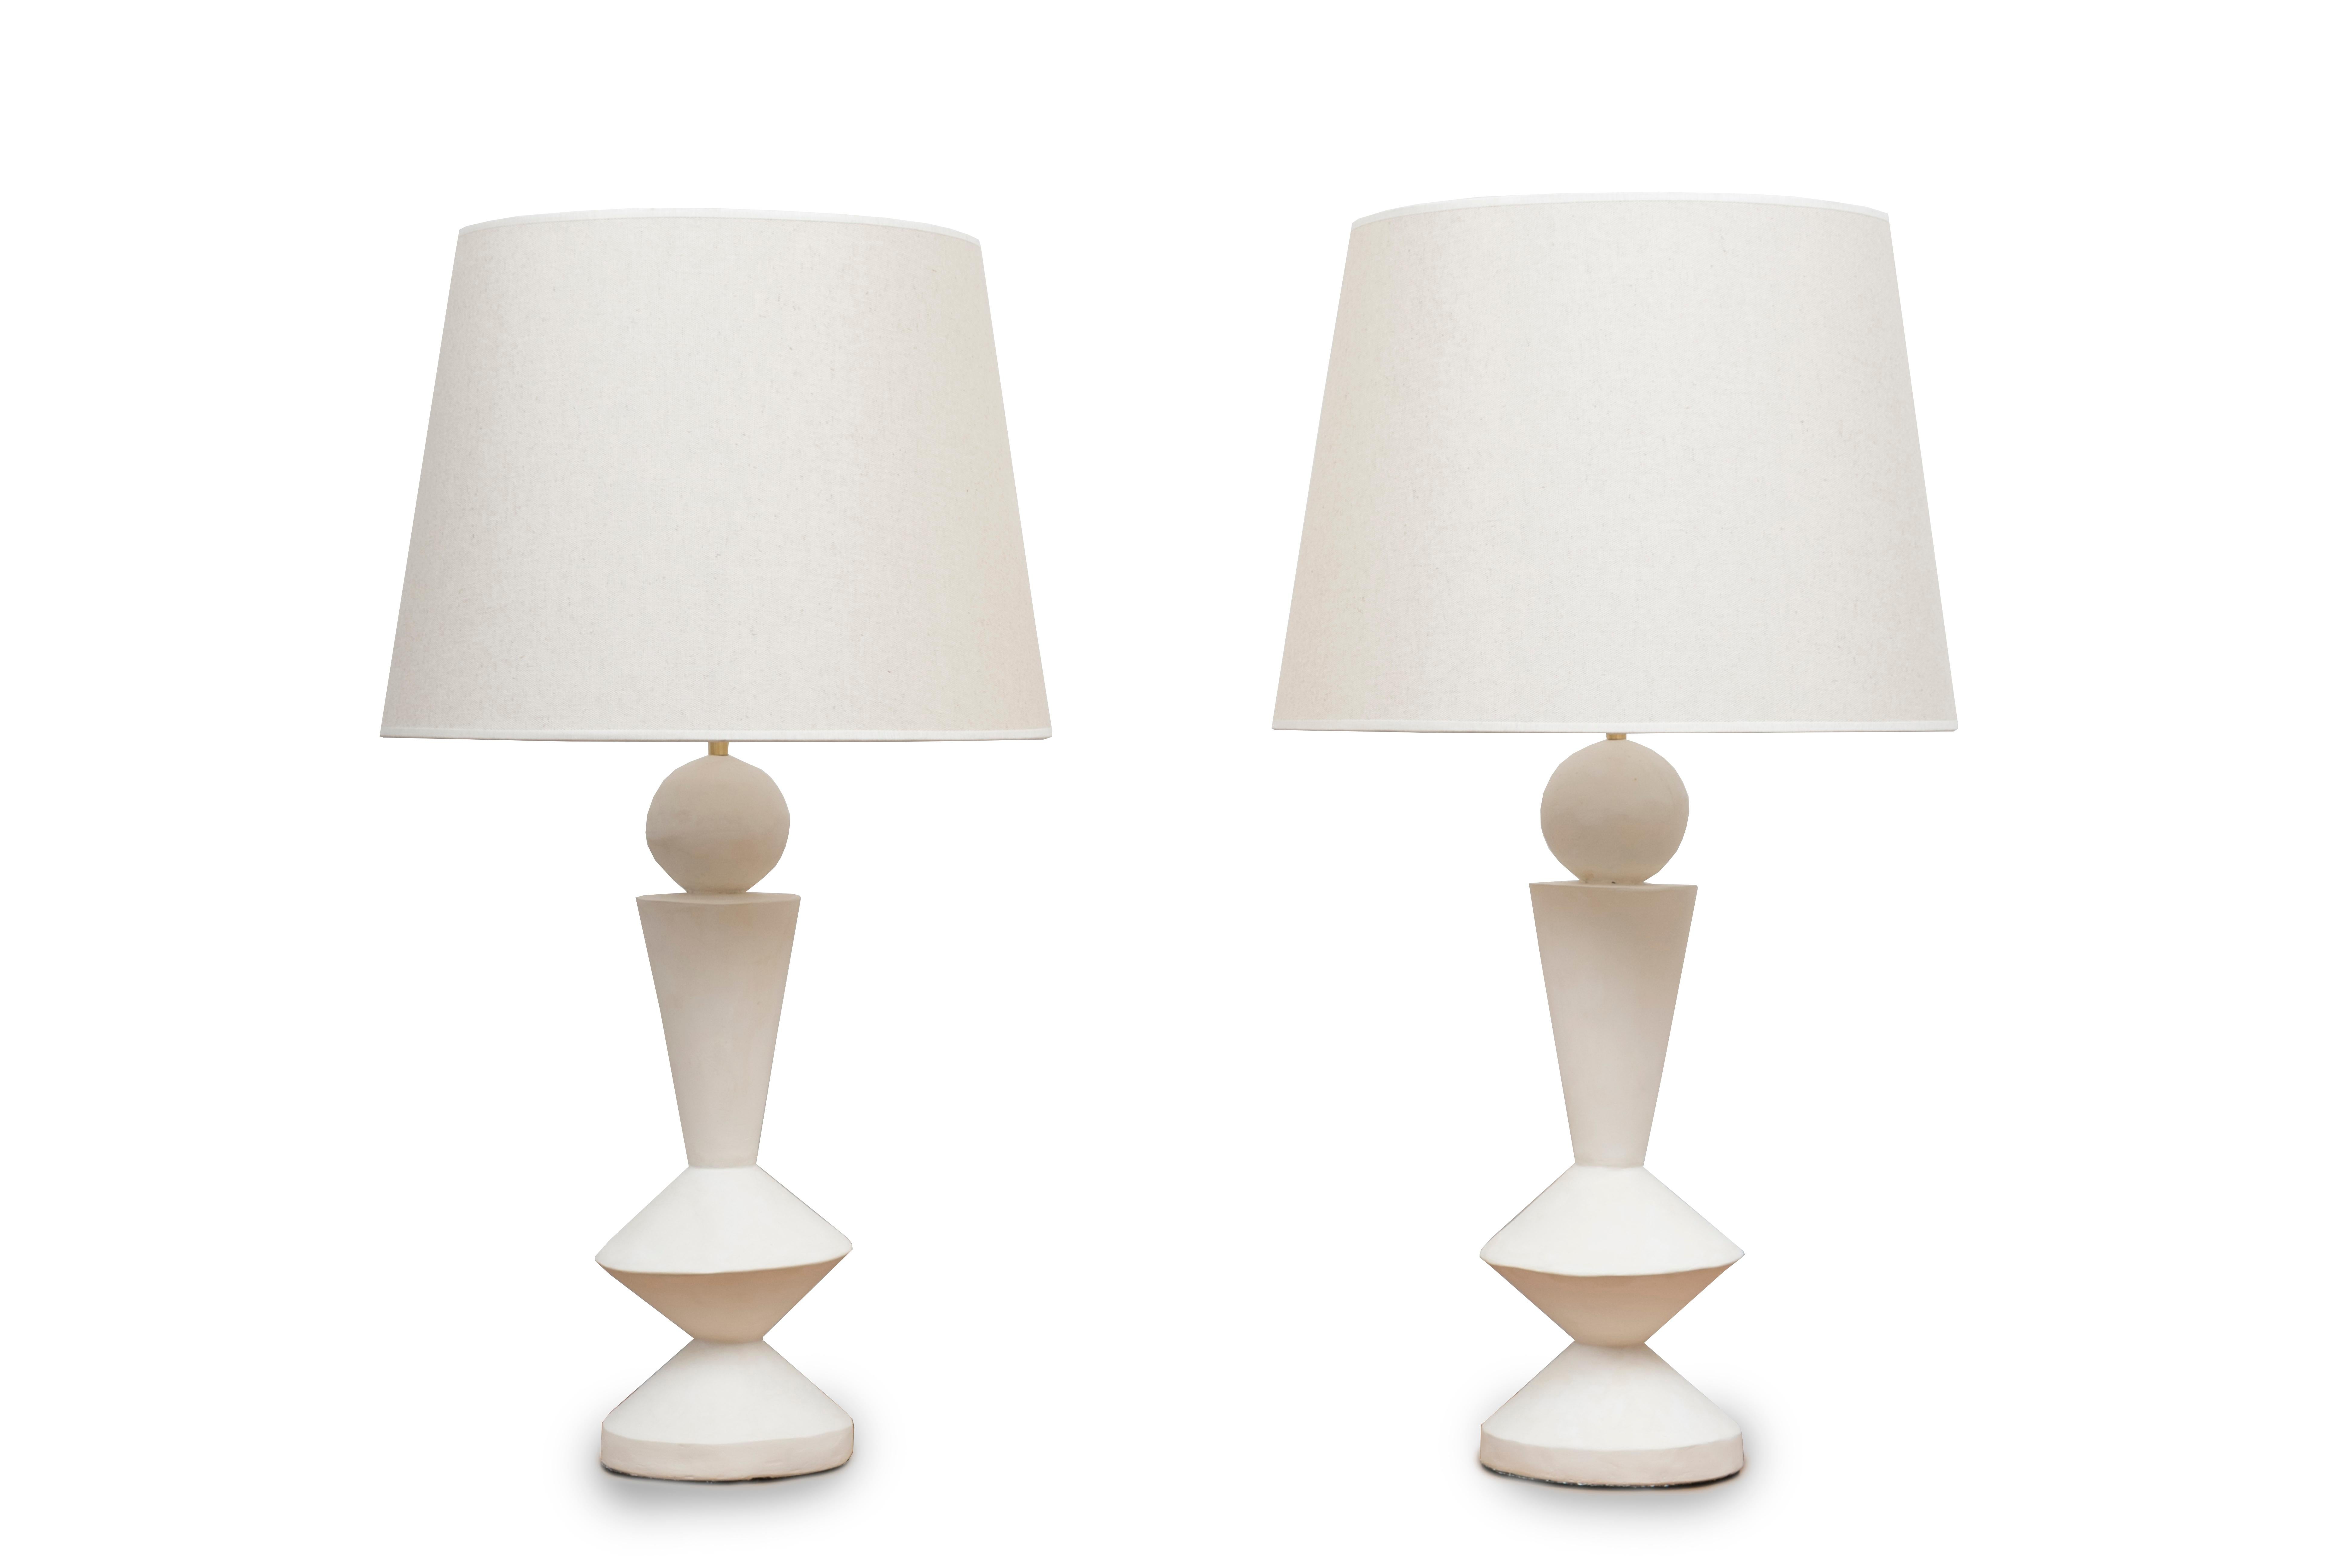 Pair of stuccoed plaster lamps
Custom made shades
Inspired by Jean-Michel Frank
France, modern production

Measures: Height total 84 cm ( 33 inches) 
Height plaster foot 47 cm ( 18.5 inches) 
Diameter (shade) 45 cm ( 17.7 inches) 